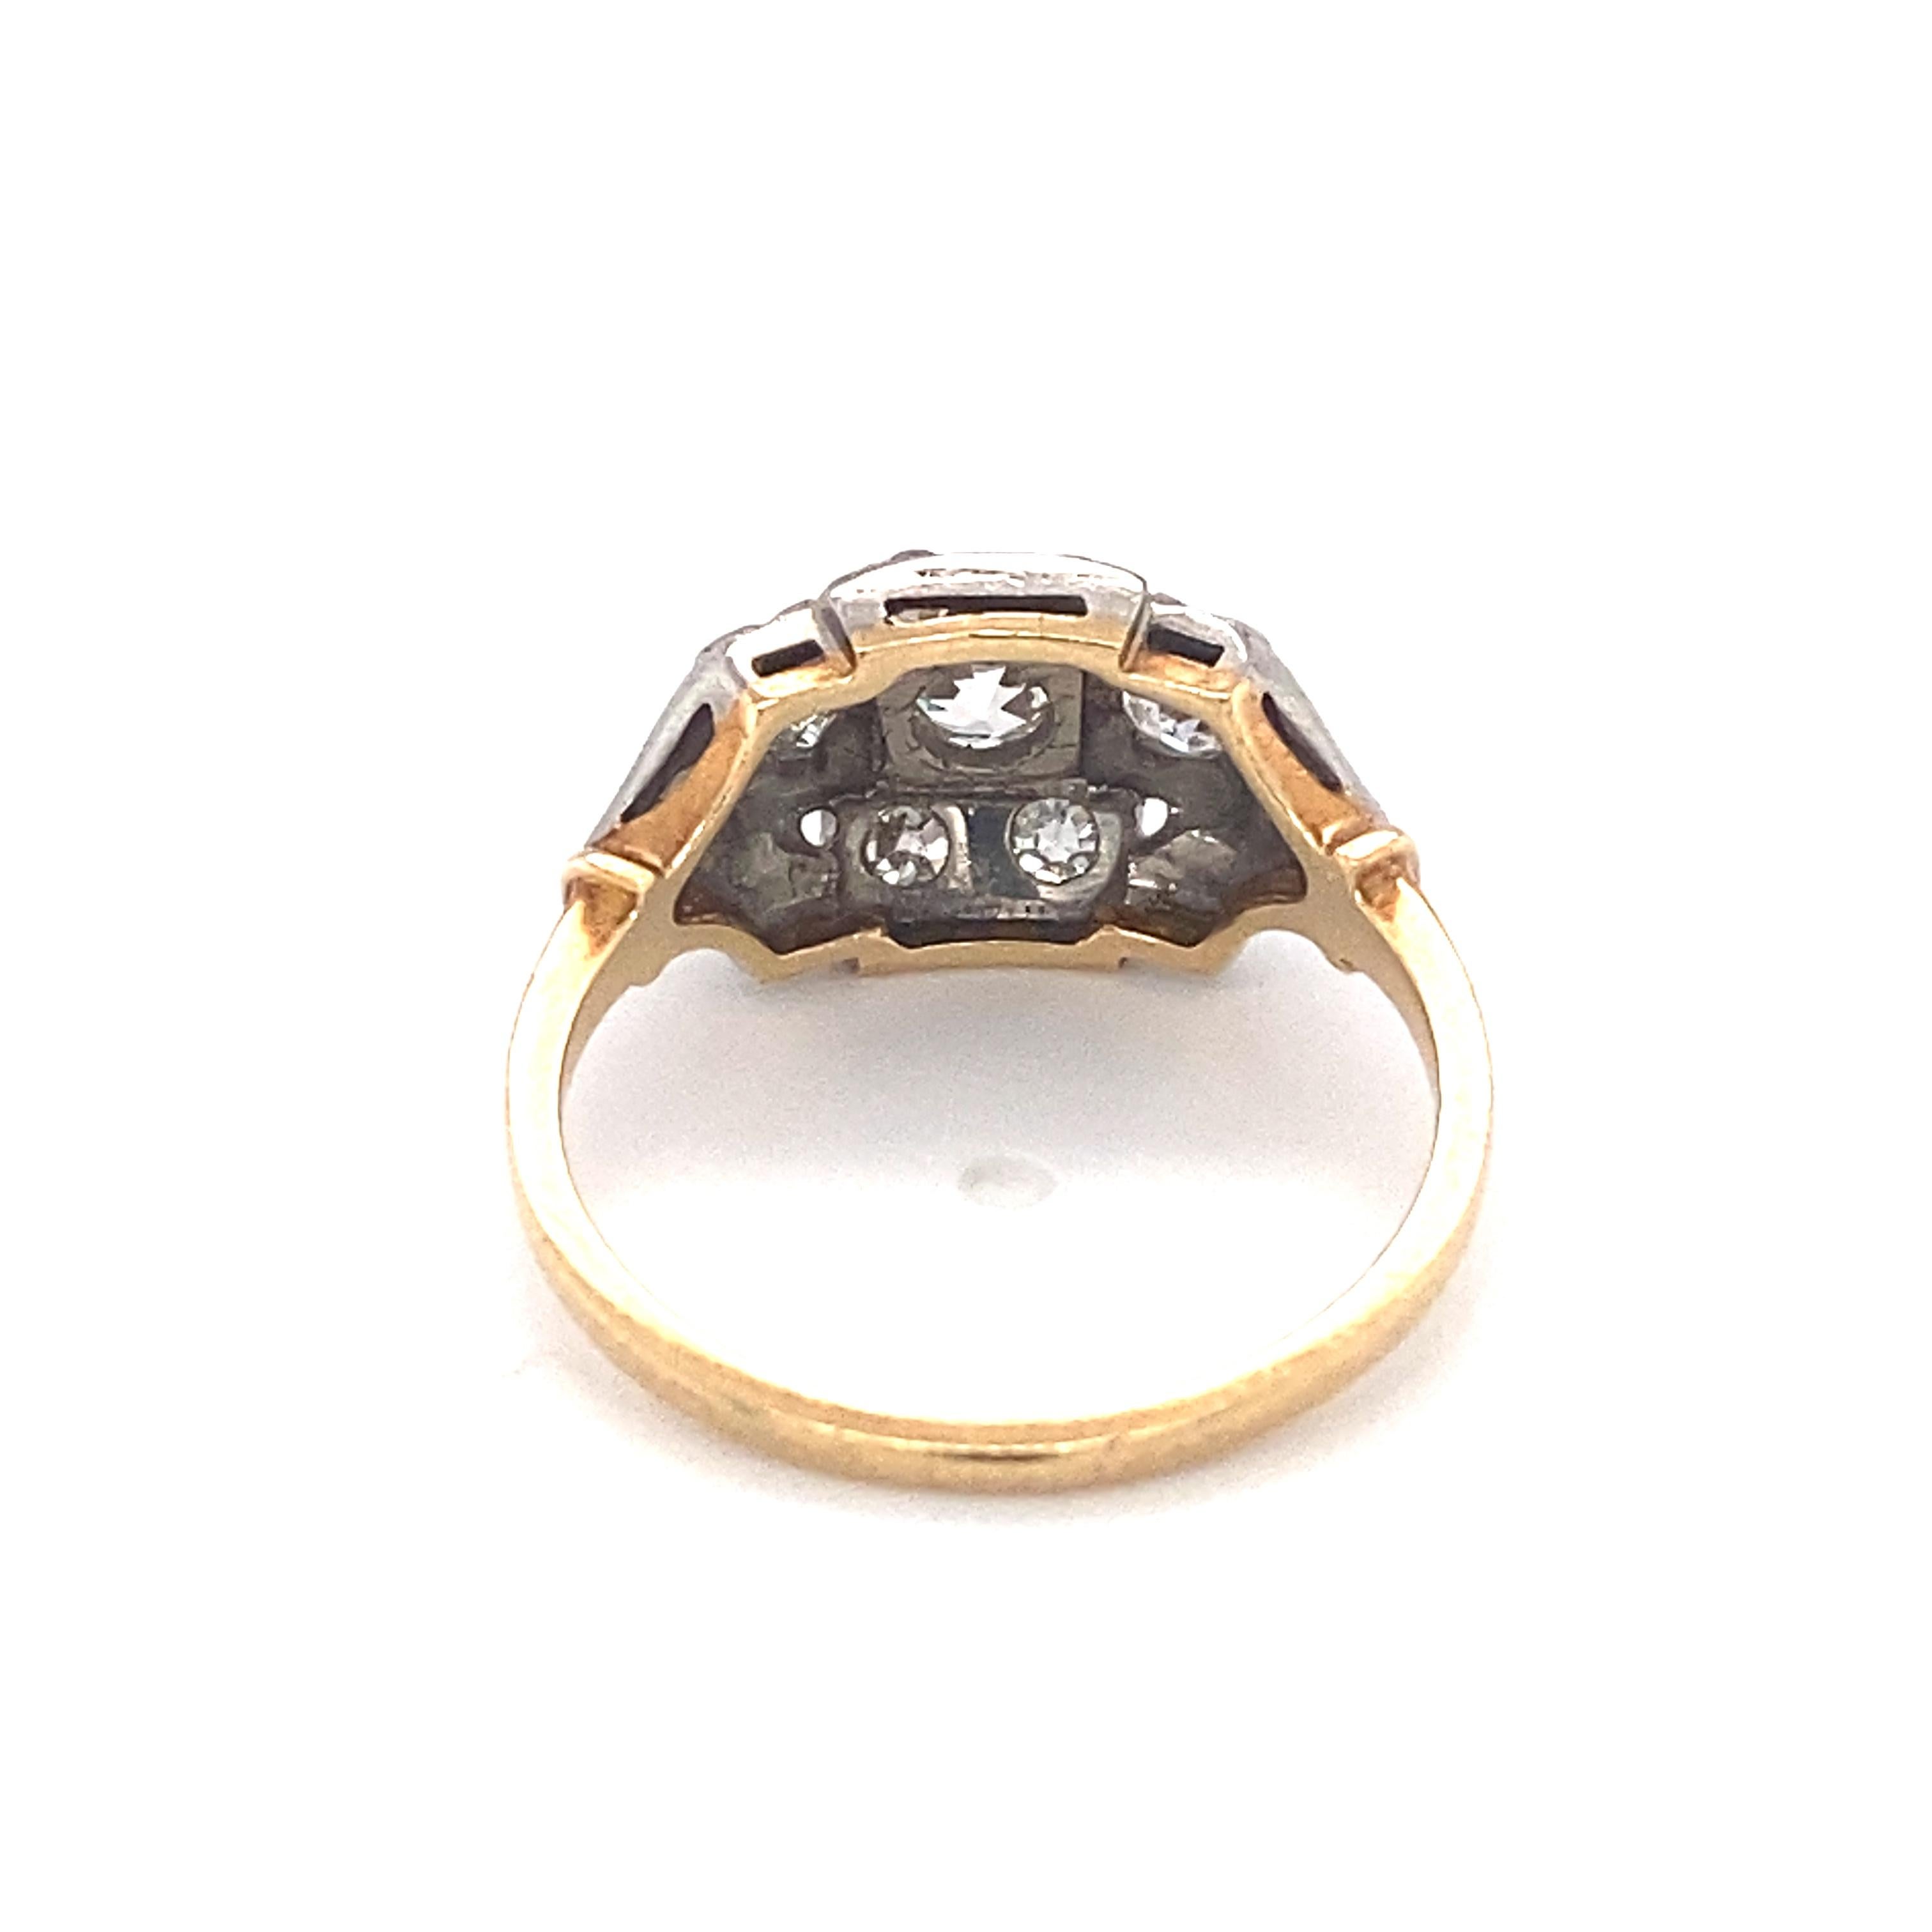 circa 1920s Art Deco Jabel 1 Carat Diamond Ring in Two Tone 14K Gold For Sale 1